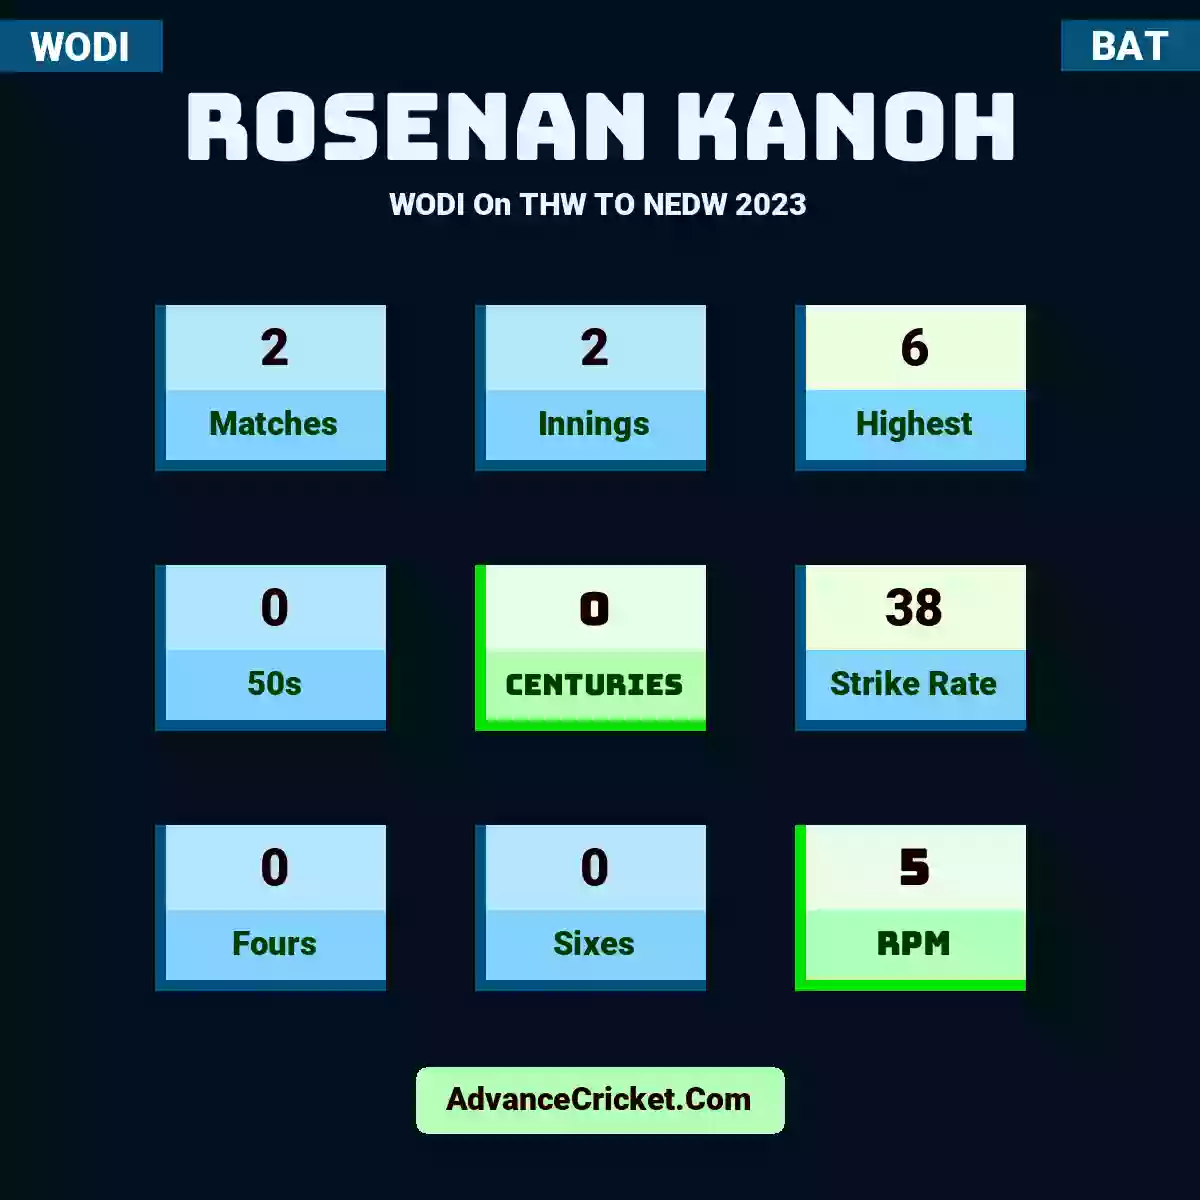 Rosenan Kanoh WODI  On THW TO NEDW 2023, Rosenan Kanoh played 2 matches, scored 6 runs as highest, 0 half-centuries, and 0 centuries, with a strike rate of 38. R.Kanoh hit 0 fours and 0 sixes, with an RPM of 5.